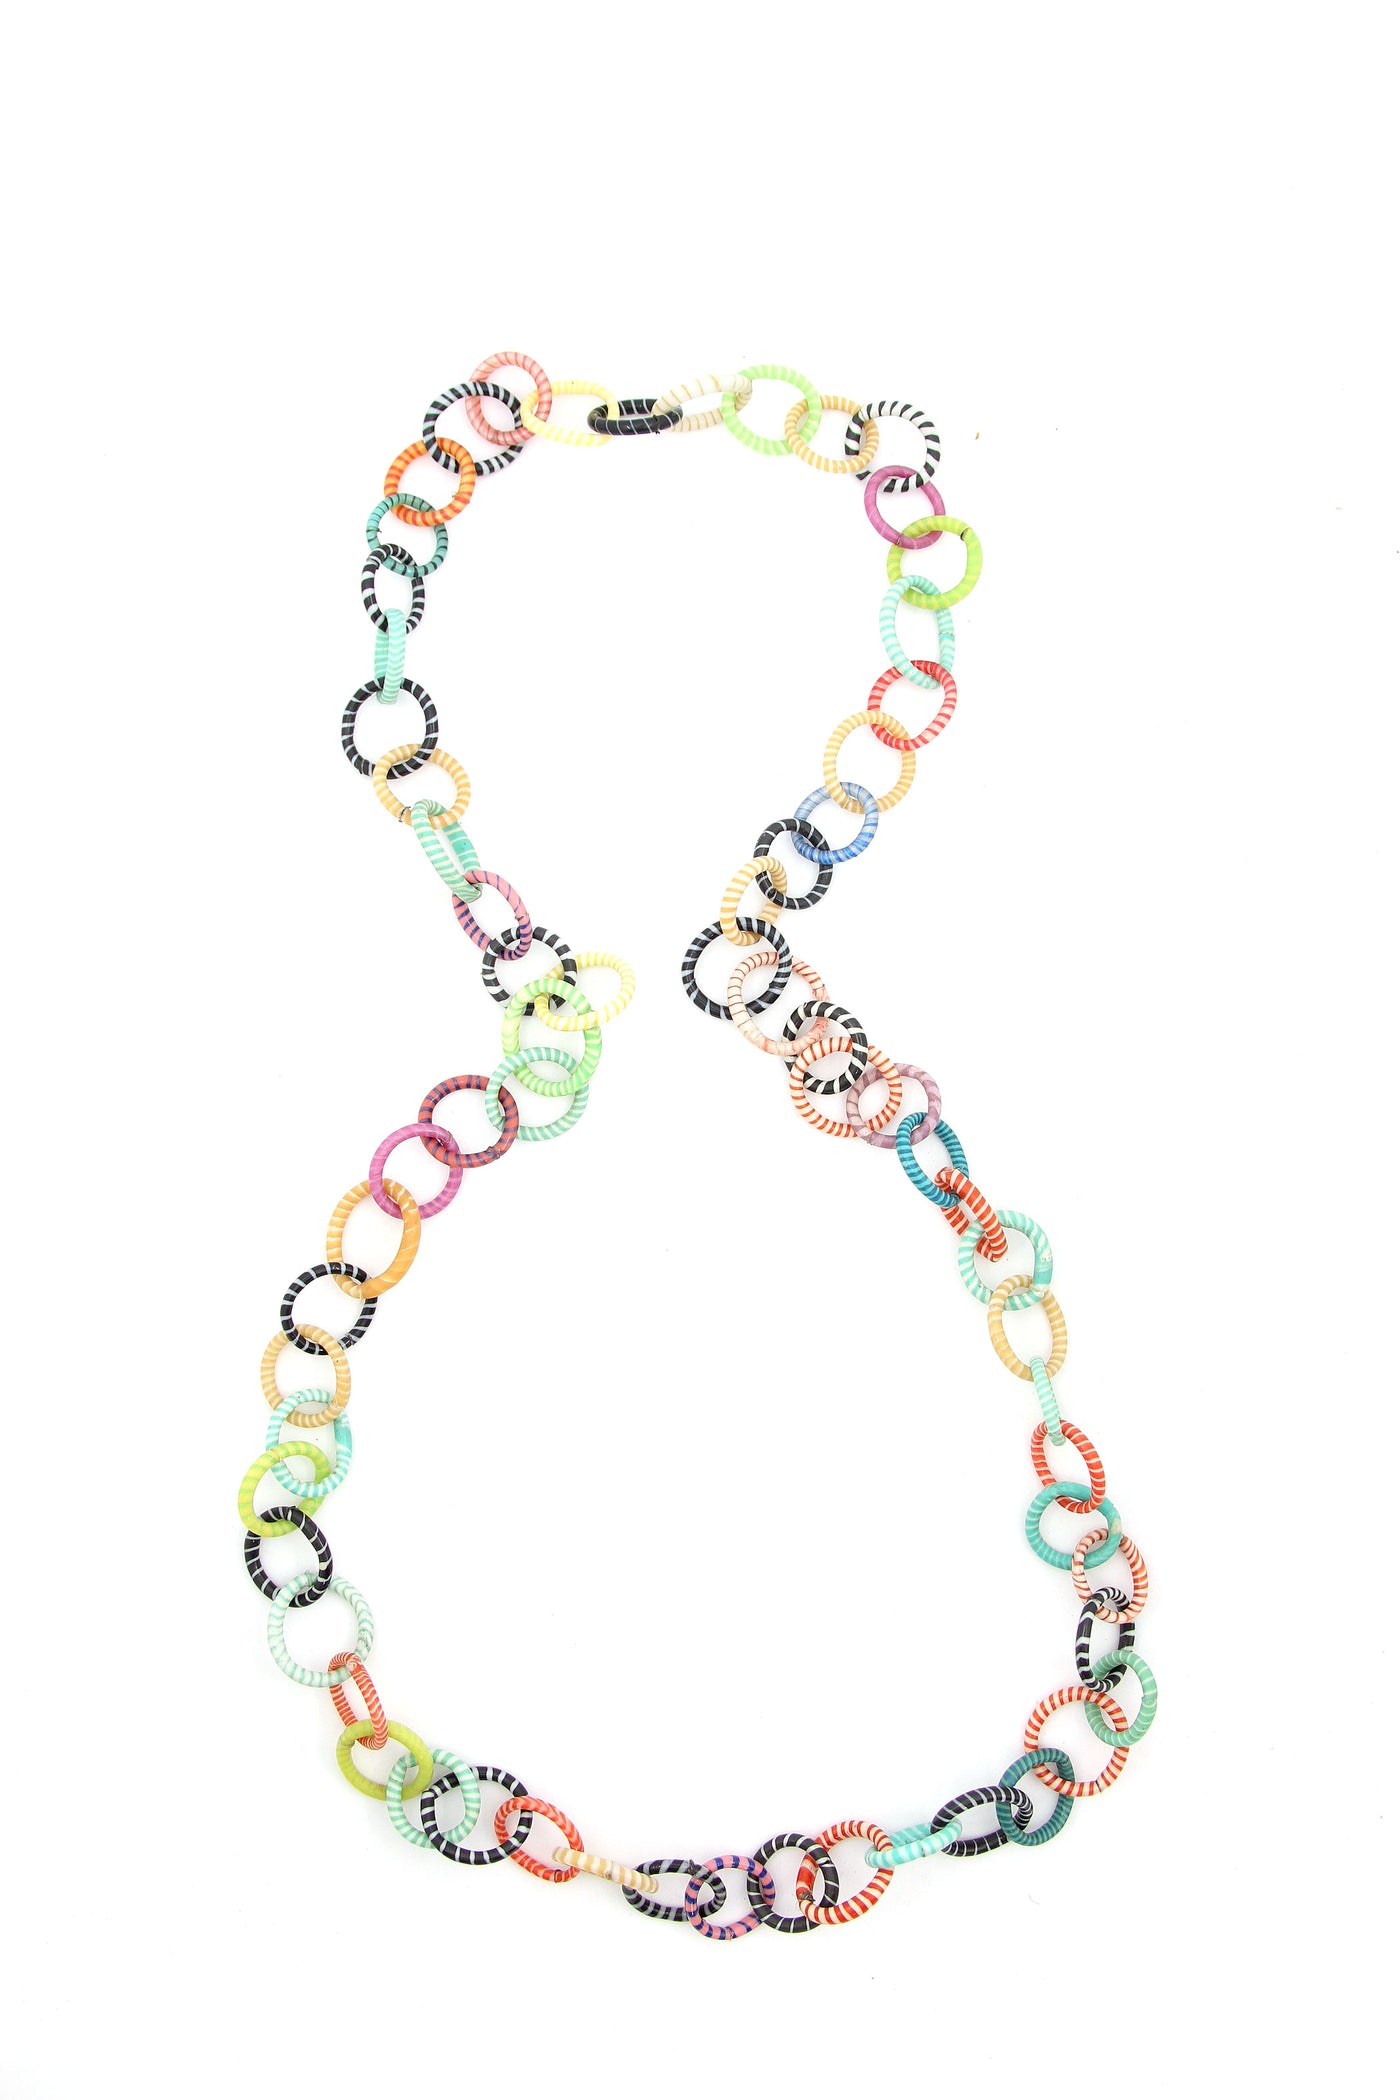 Waterproof colorful necklace from Africa, fair trade